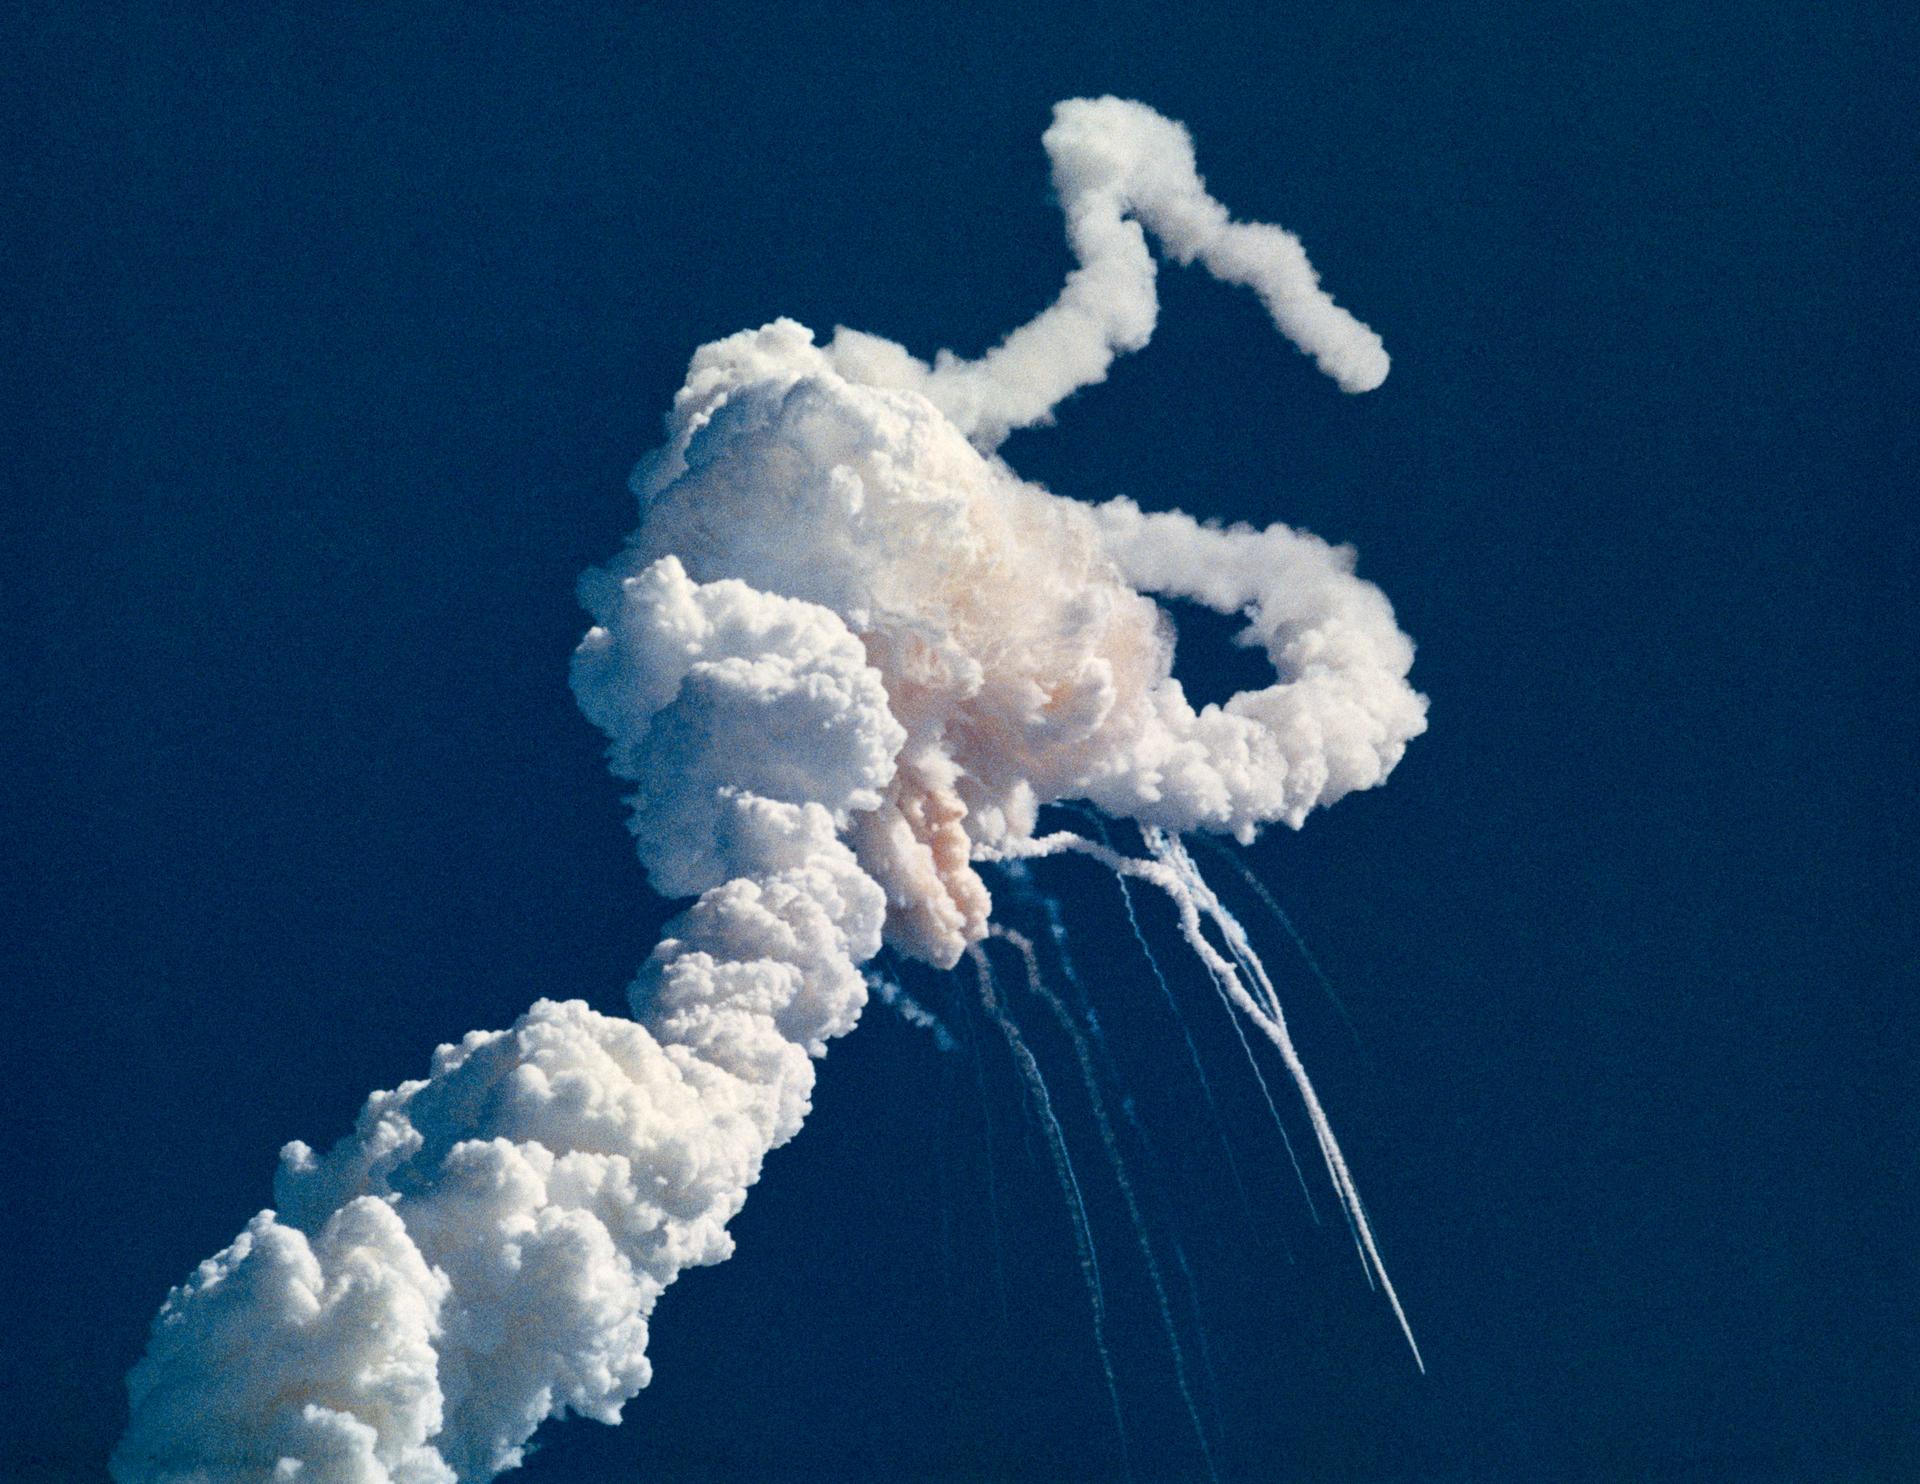 The Challenger explosion, January 28, 1986. (Source: NASA)